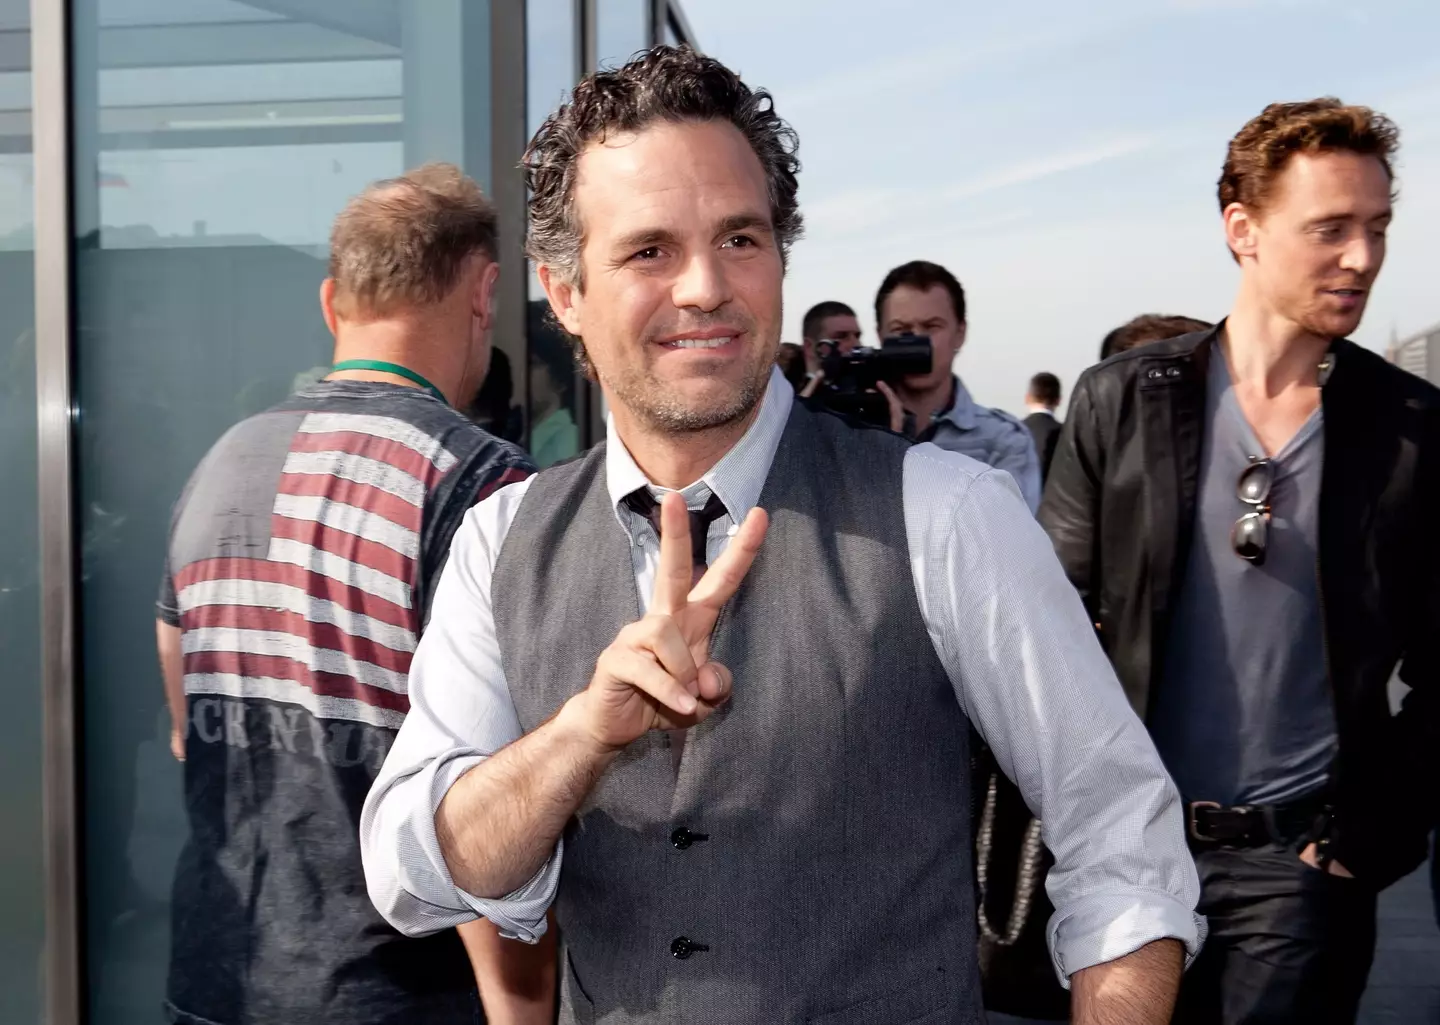 Back in the early days of his career, one of actor Mark Ruffalo’s dreams quite literally came true.